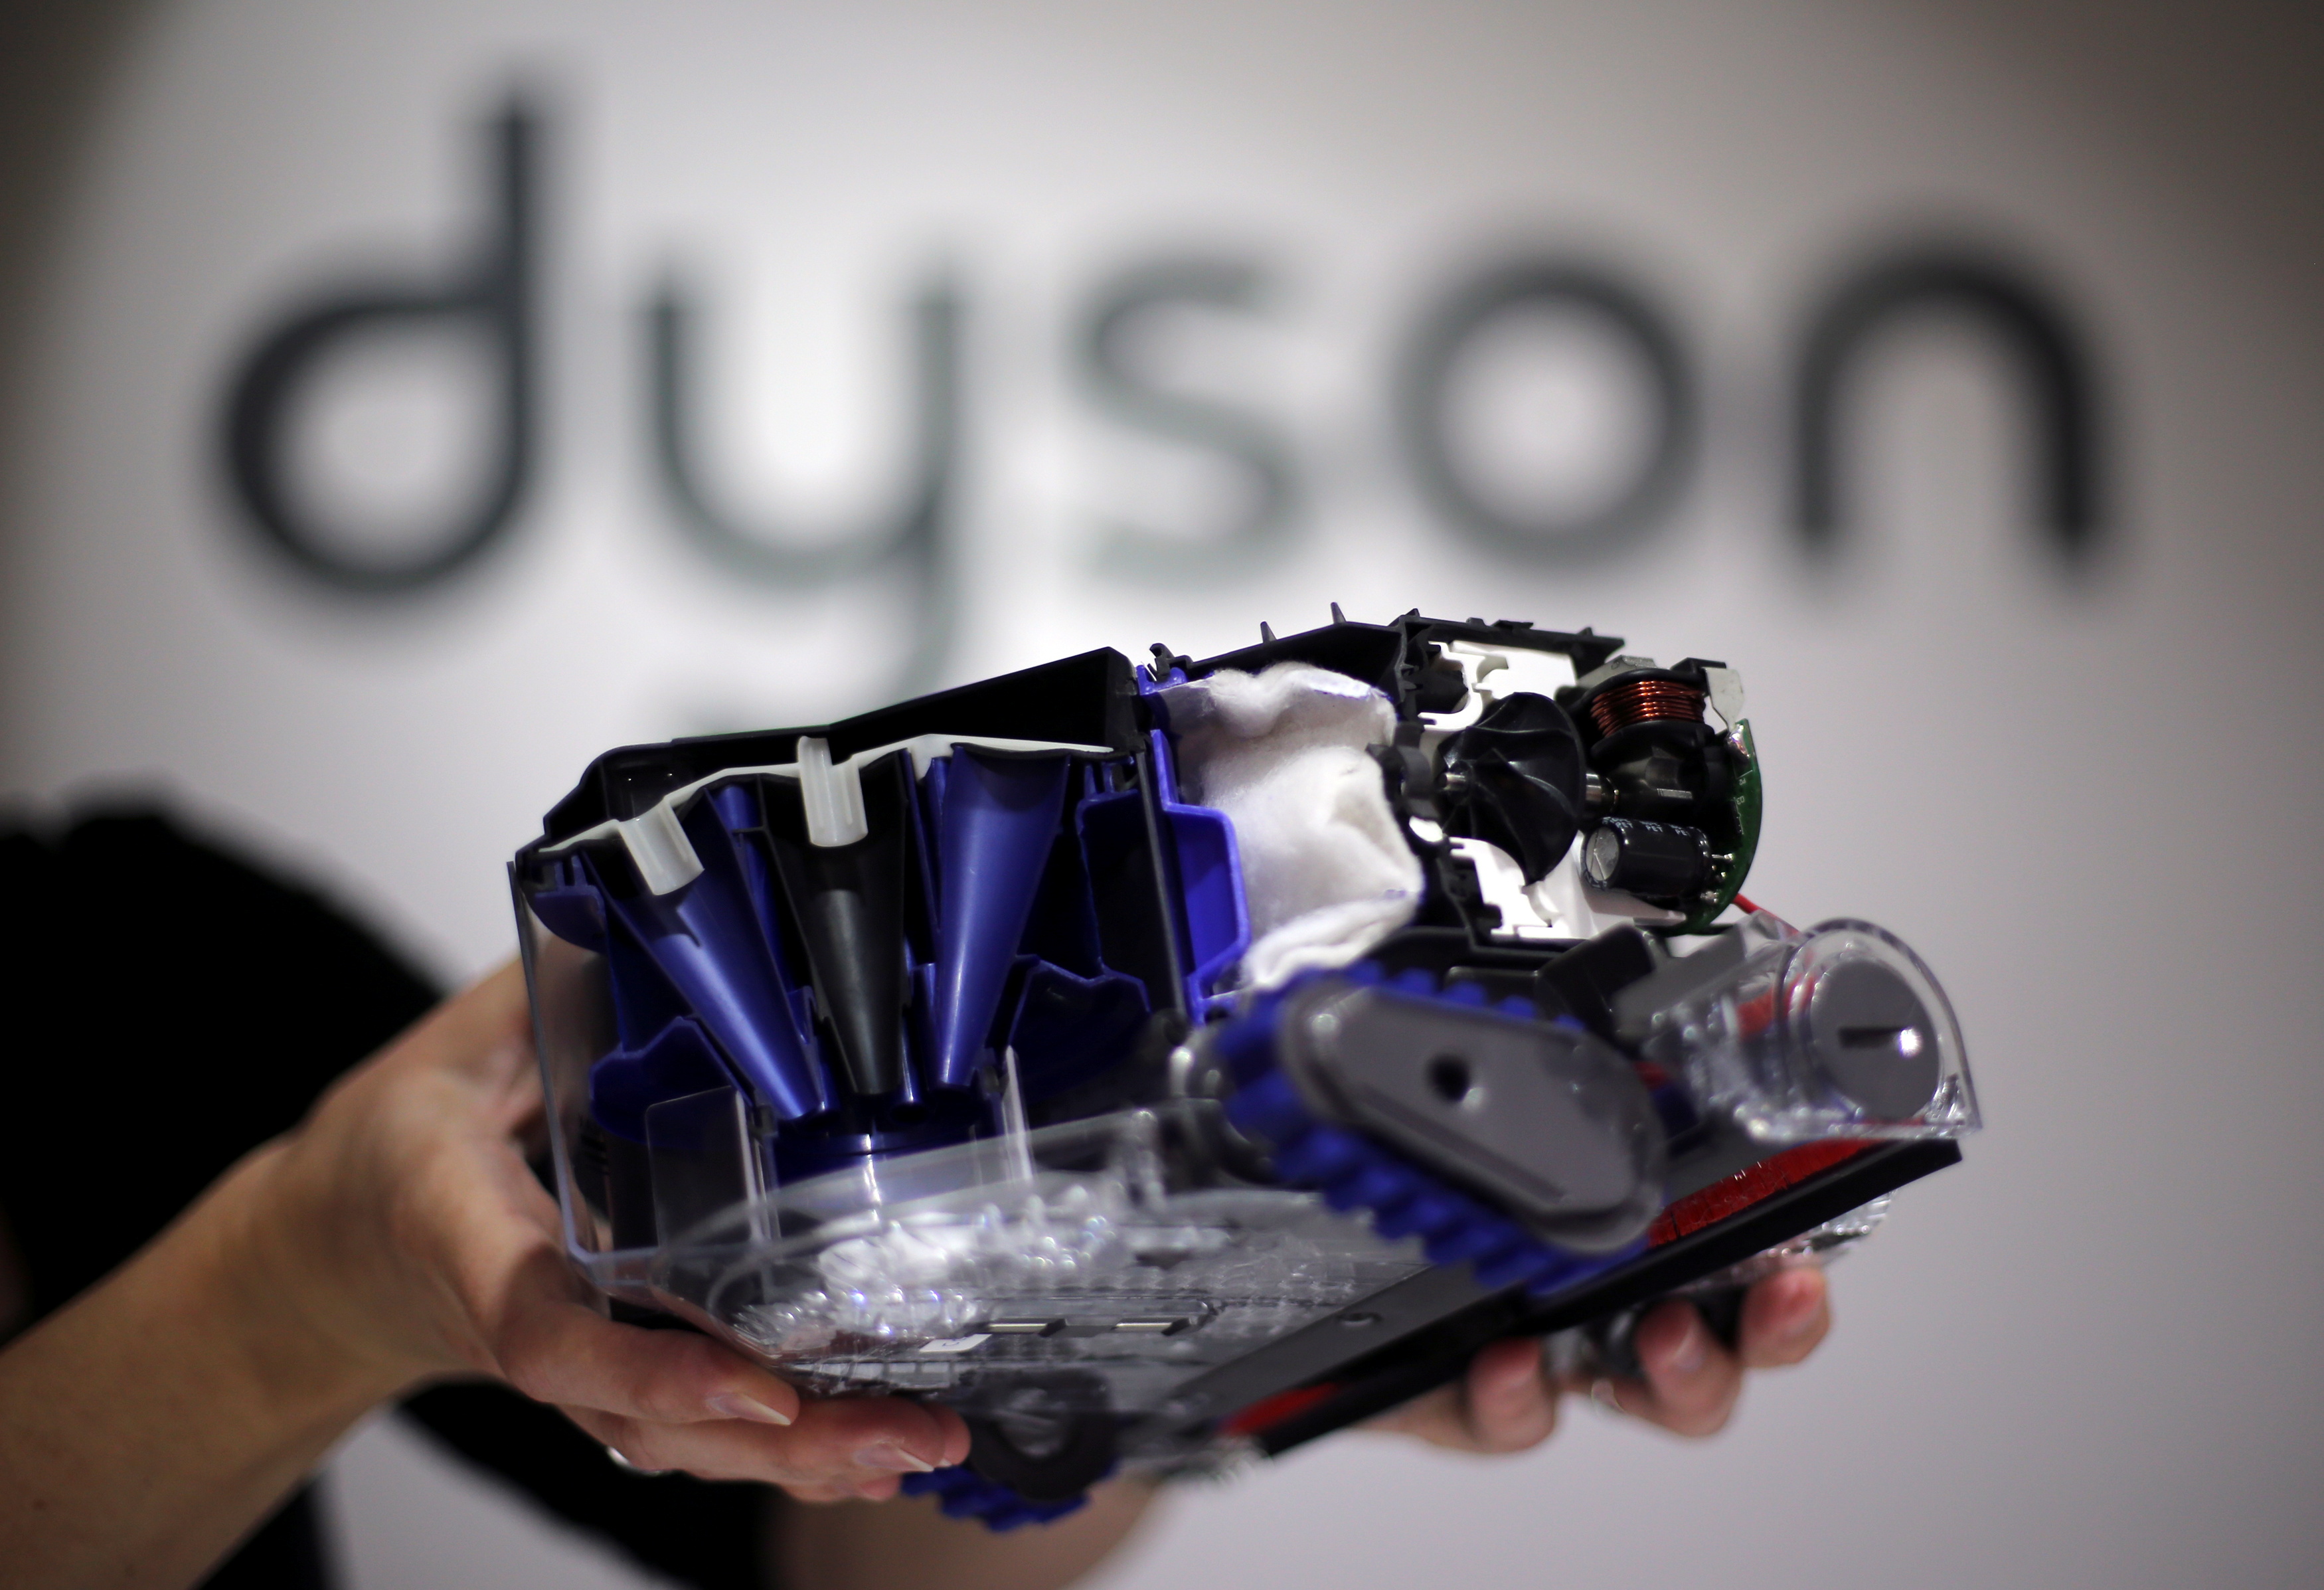 A Dyson employee shows a Dyson 360 Eye robot vacuum cleaner without its cover during the IFA Electronics show in Berlin